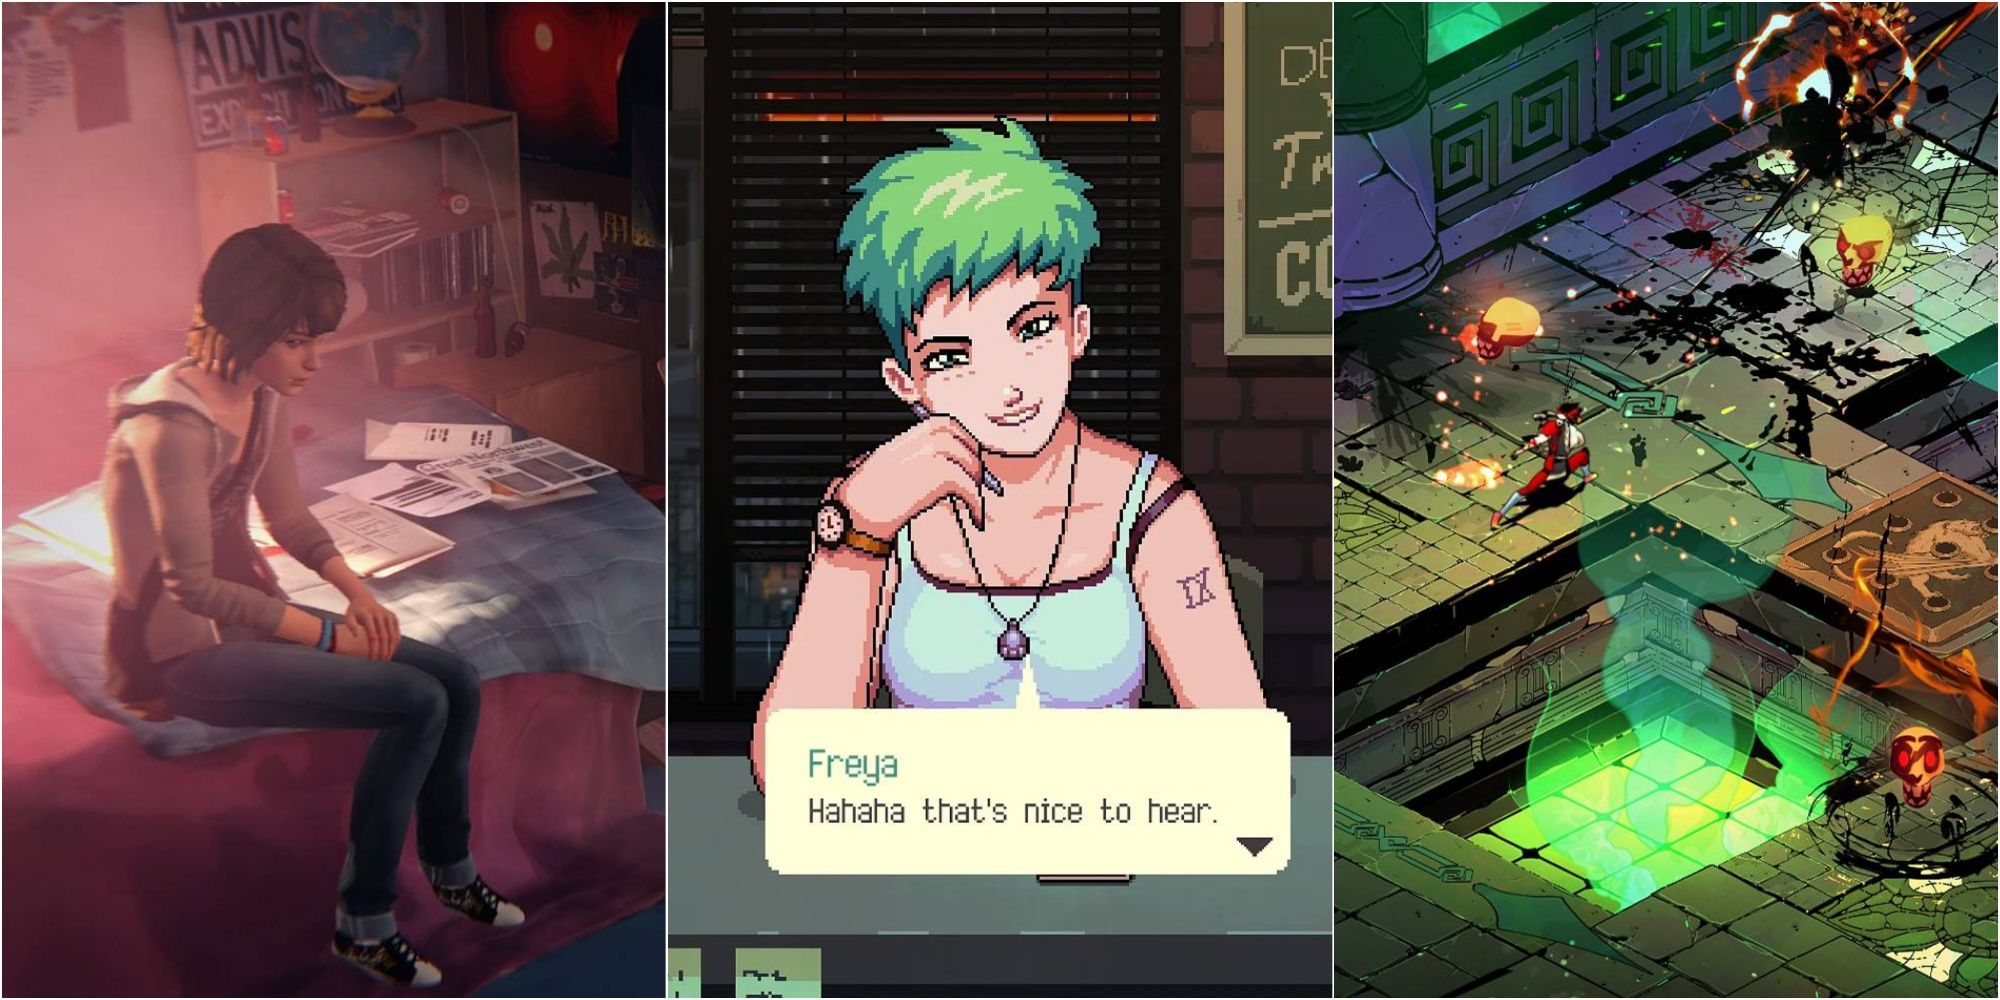 A collage of items from a young woman sitting on a bed to a green haired woman smiling in a cafe to an isometric view of a figure fighting floating skeletons